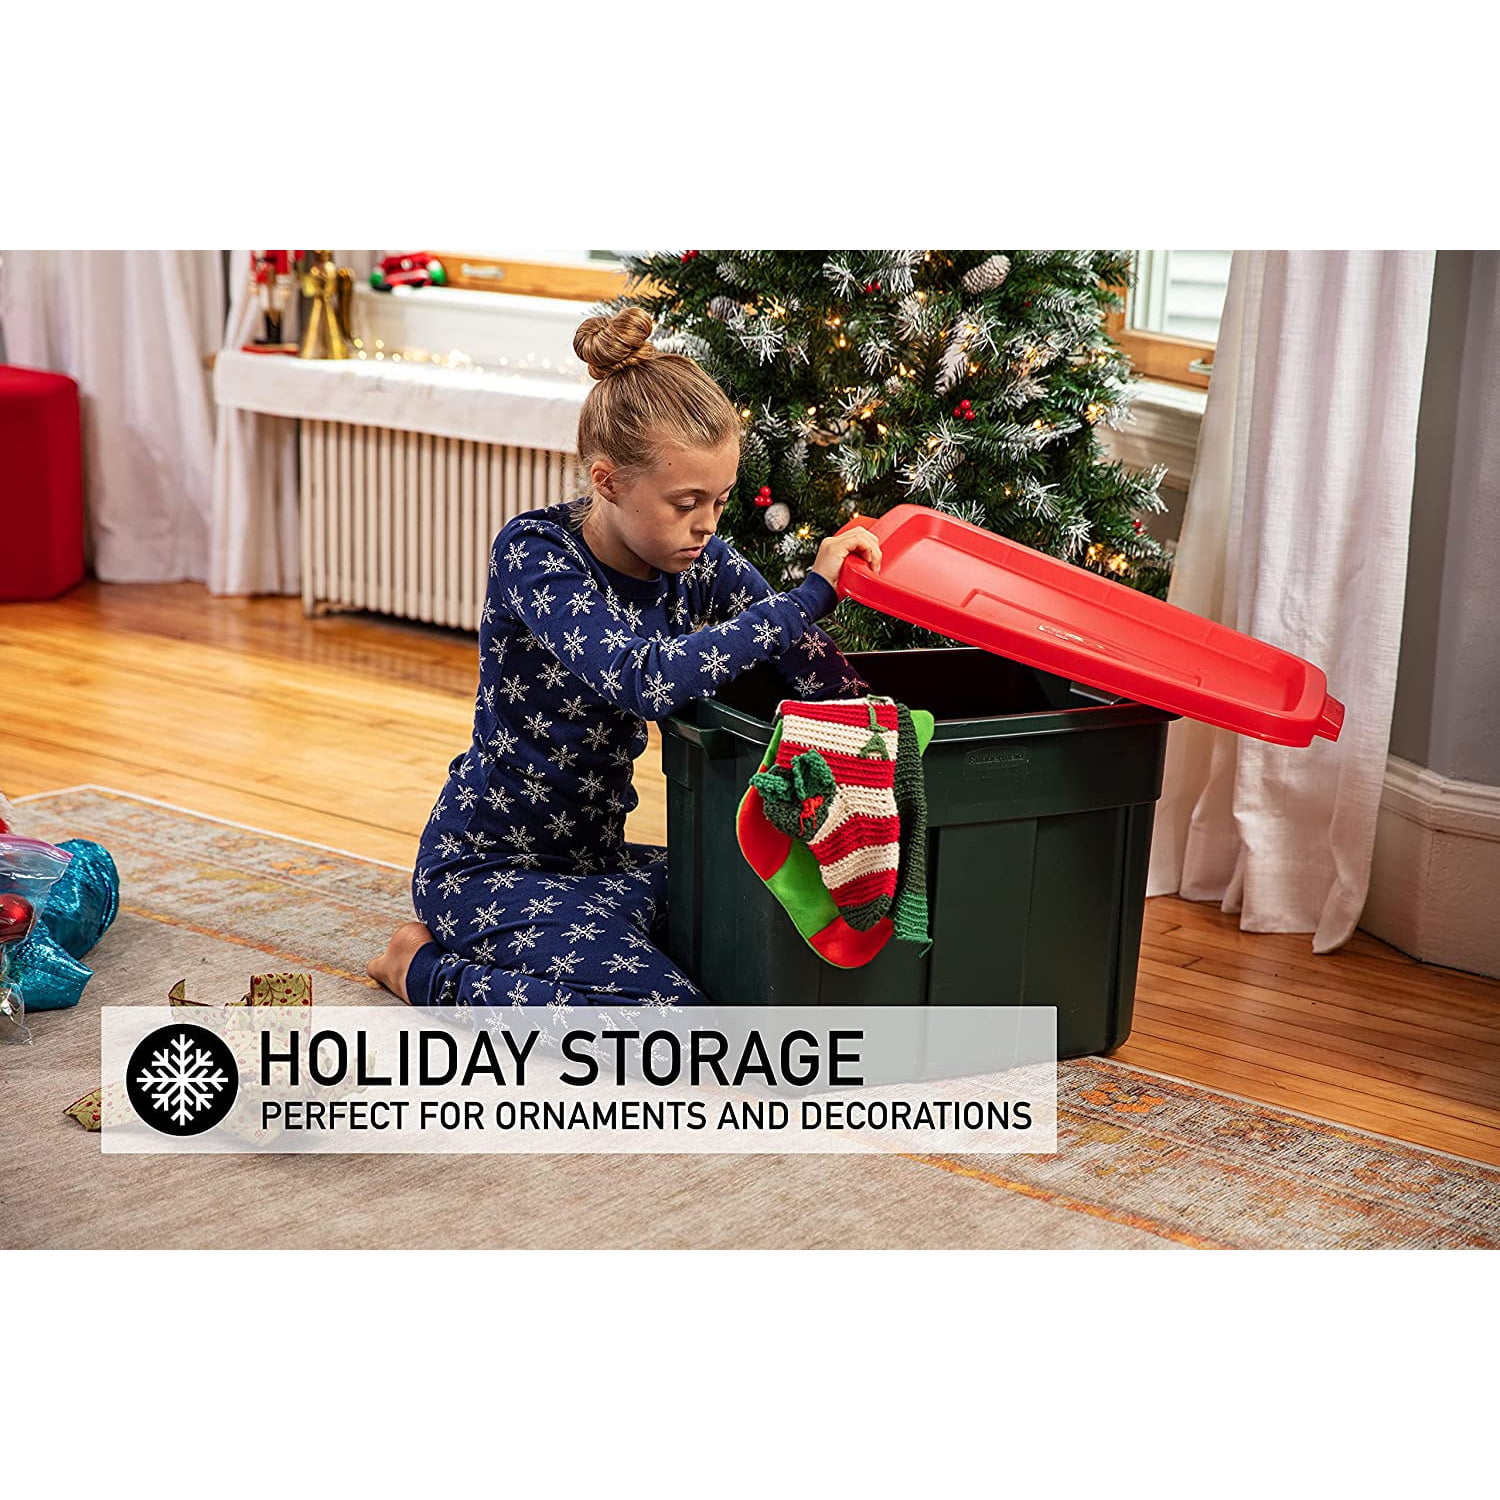  SIMPLYKLEEN 4-Pack Christmas Storage Totes with Lids  (Red/Green), 18-Gallon (72-Quart) Organization Bins, 25.50 x 17.00 x  15.25, Holiday Organizer, Plastic Storage Container Made in the USA